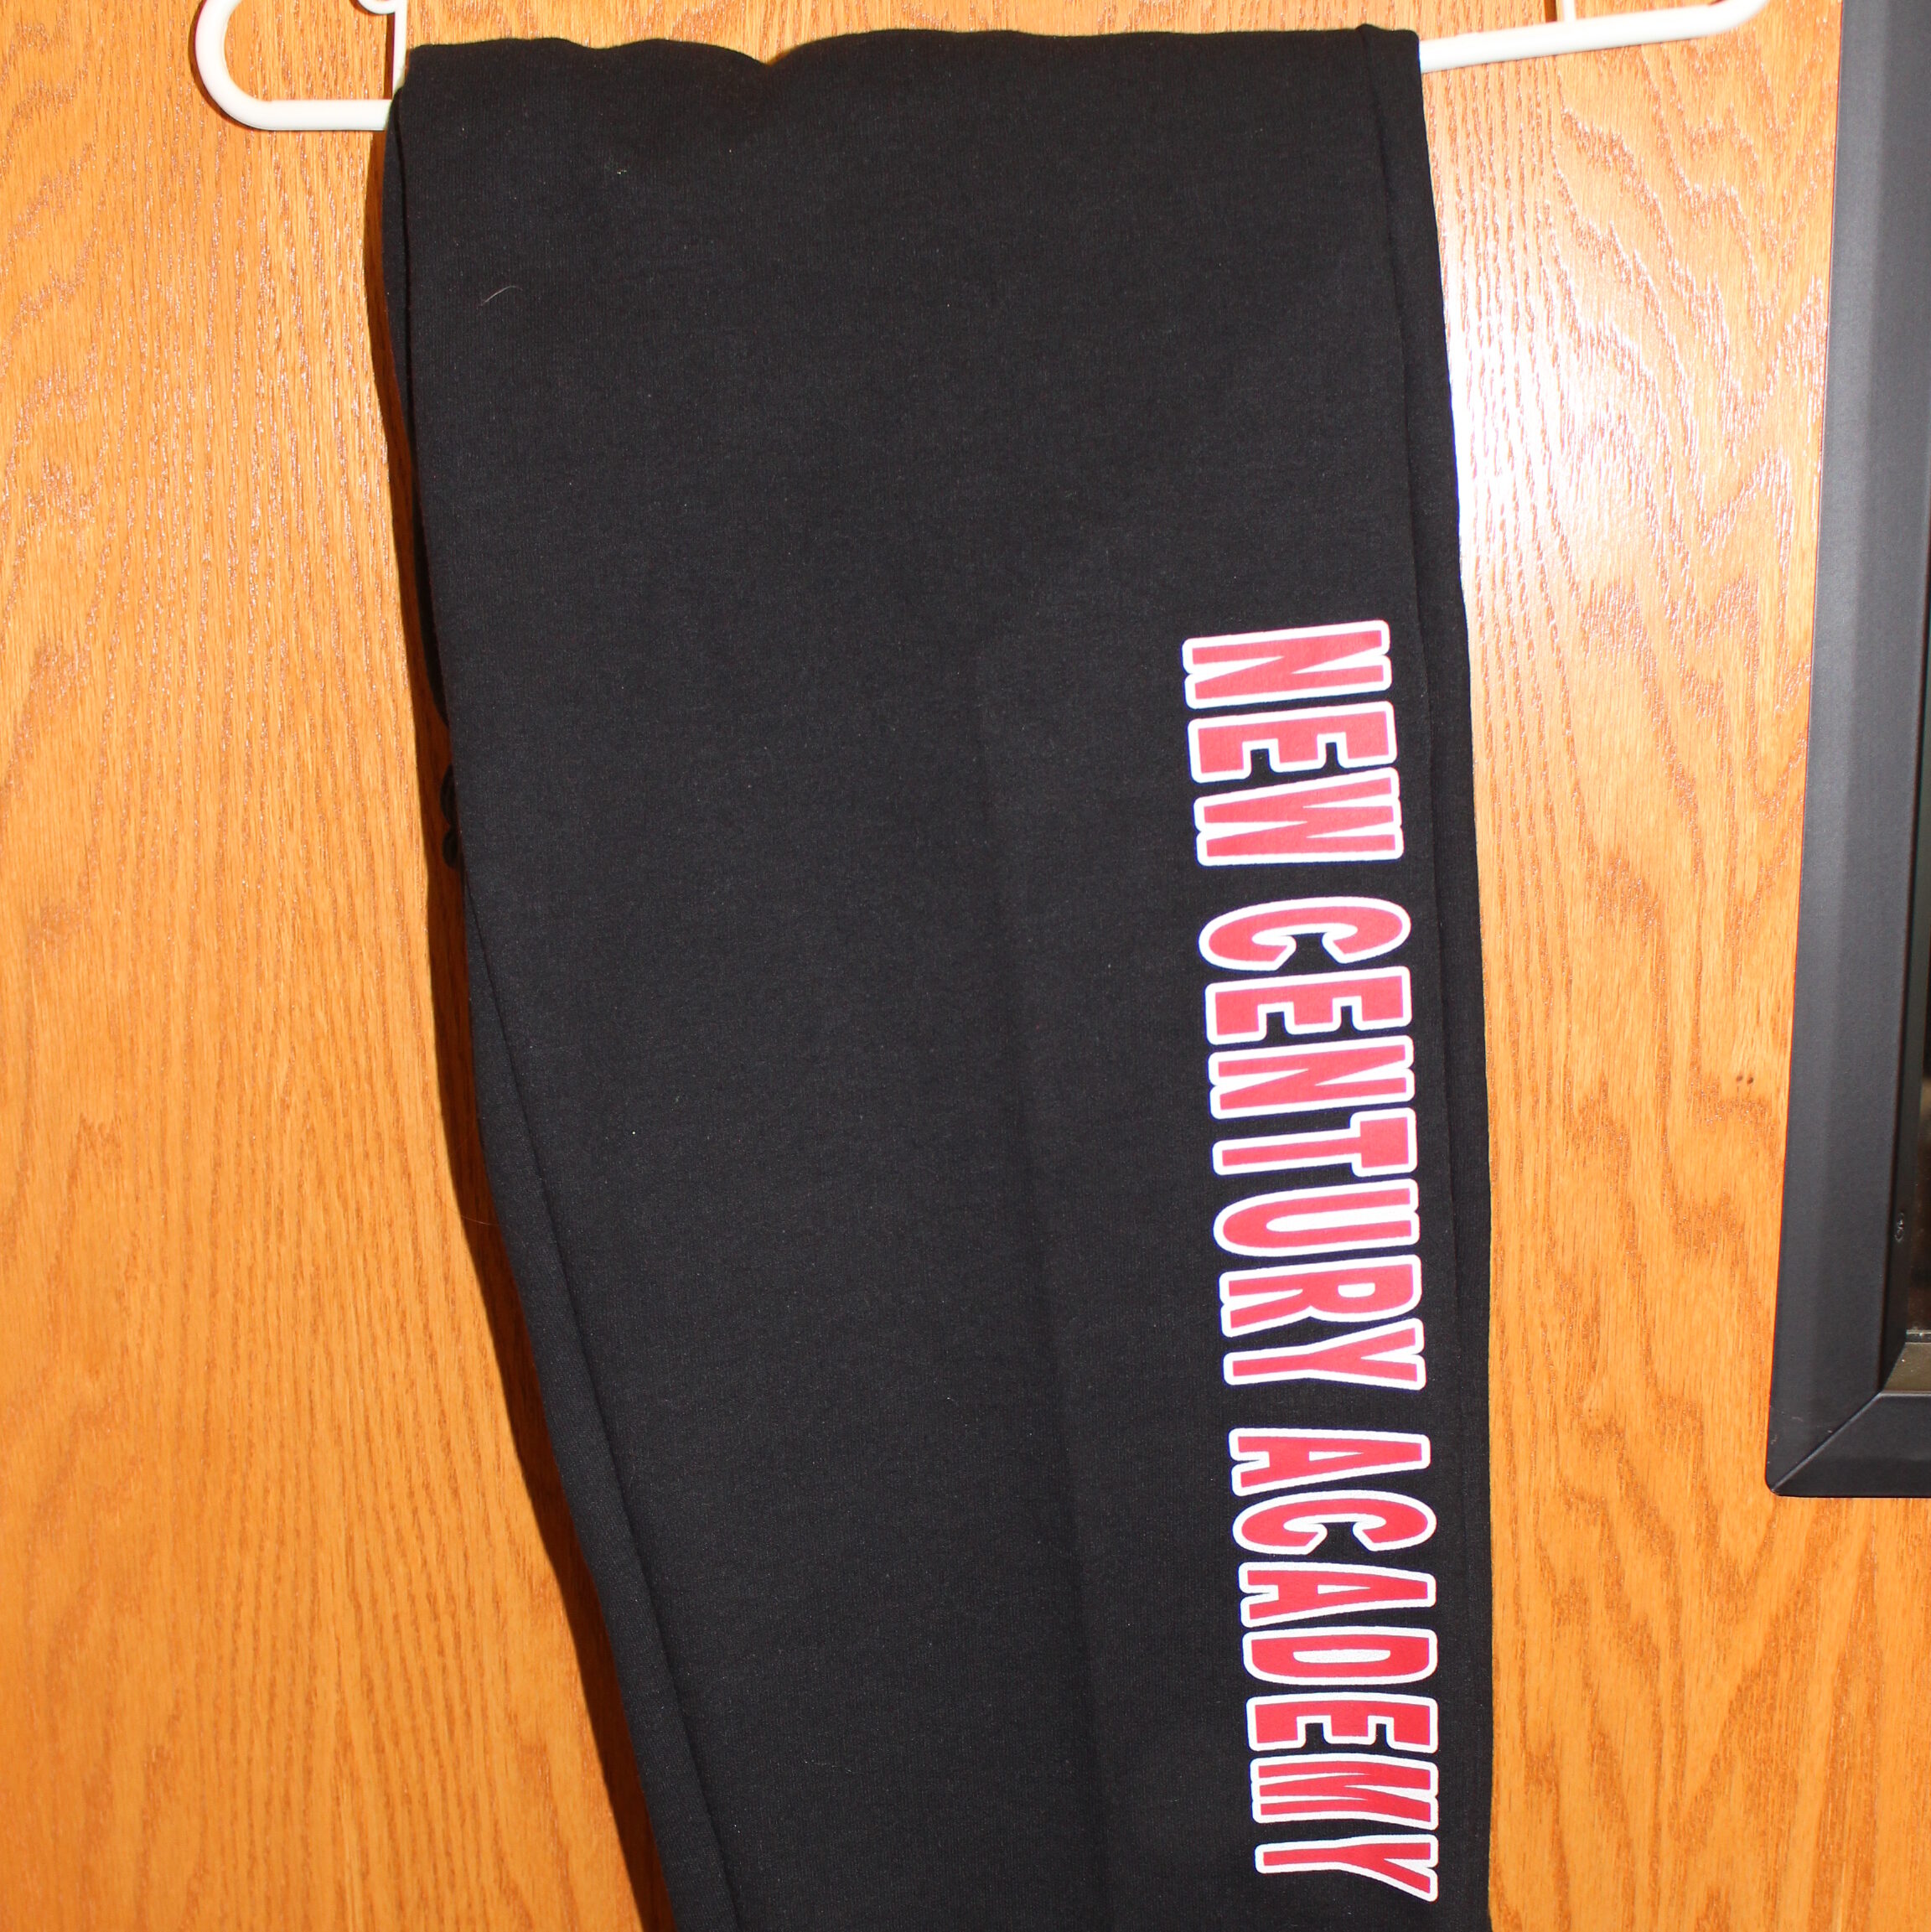 Black sweatpants with the words "New Century Academy" on them